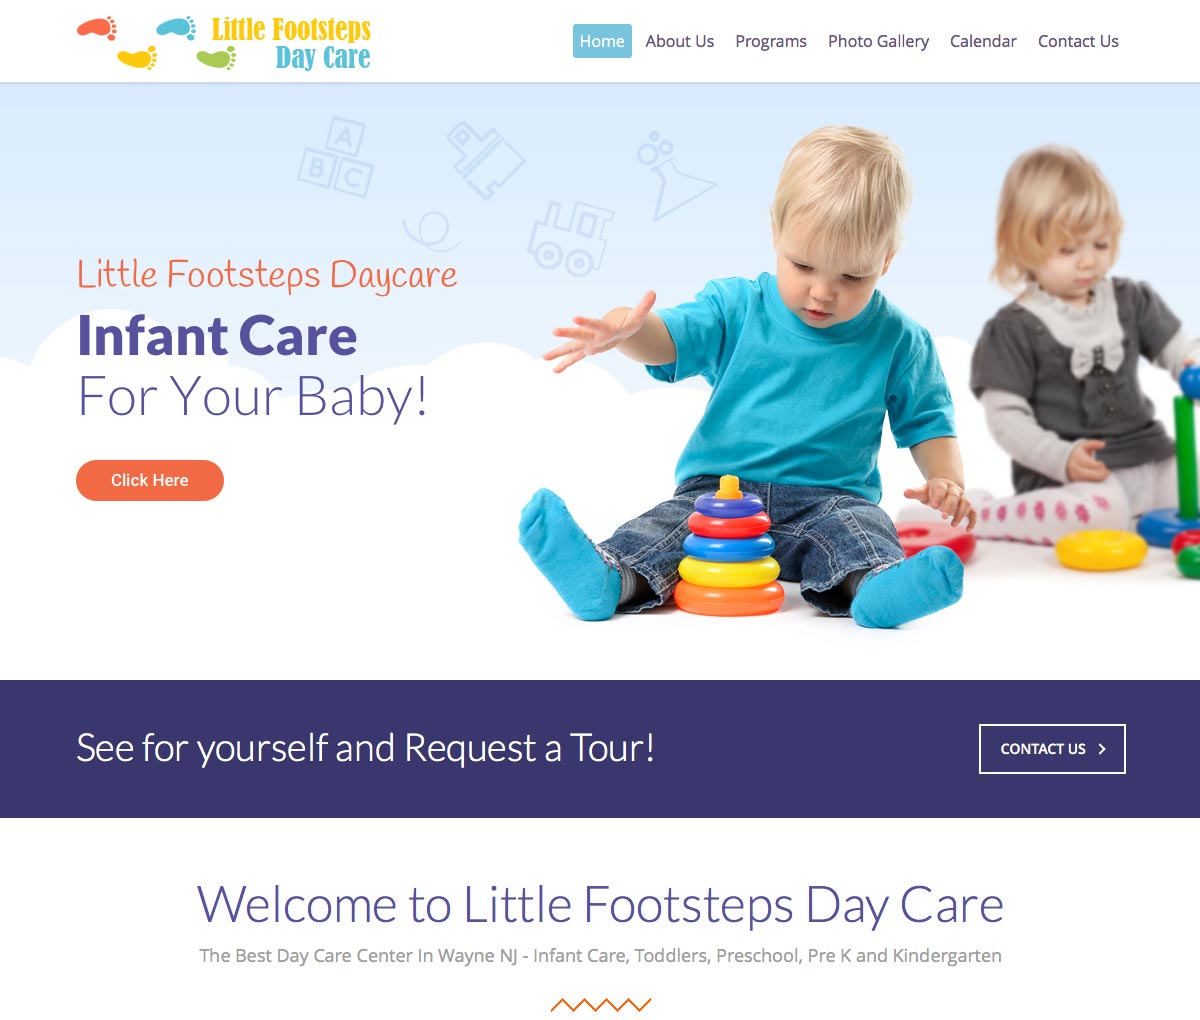 Little Footsteps Day Care